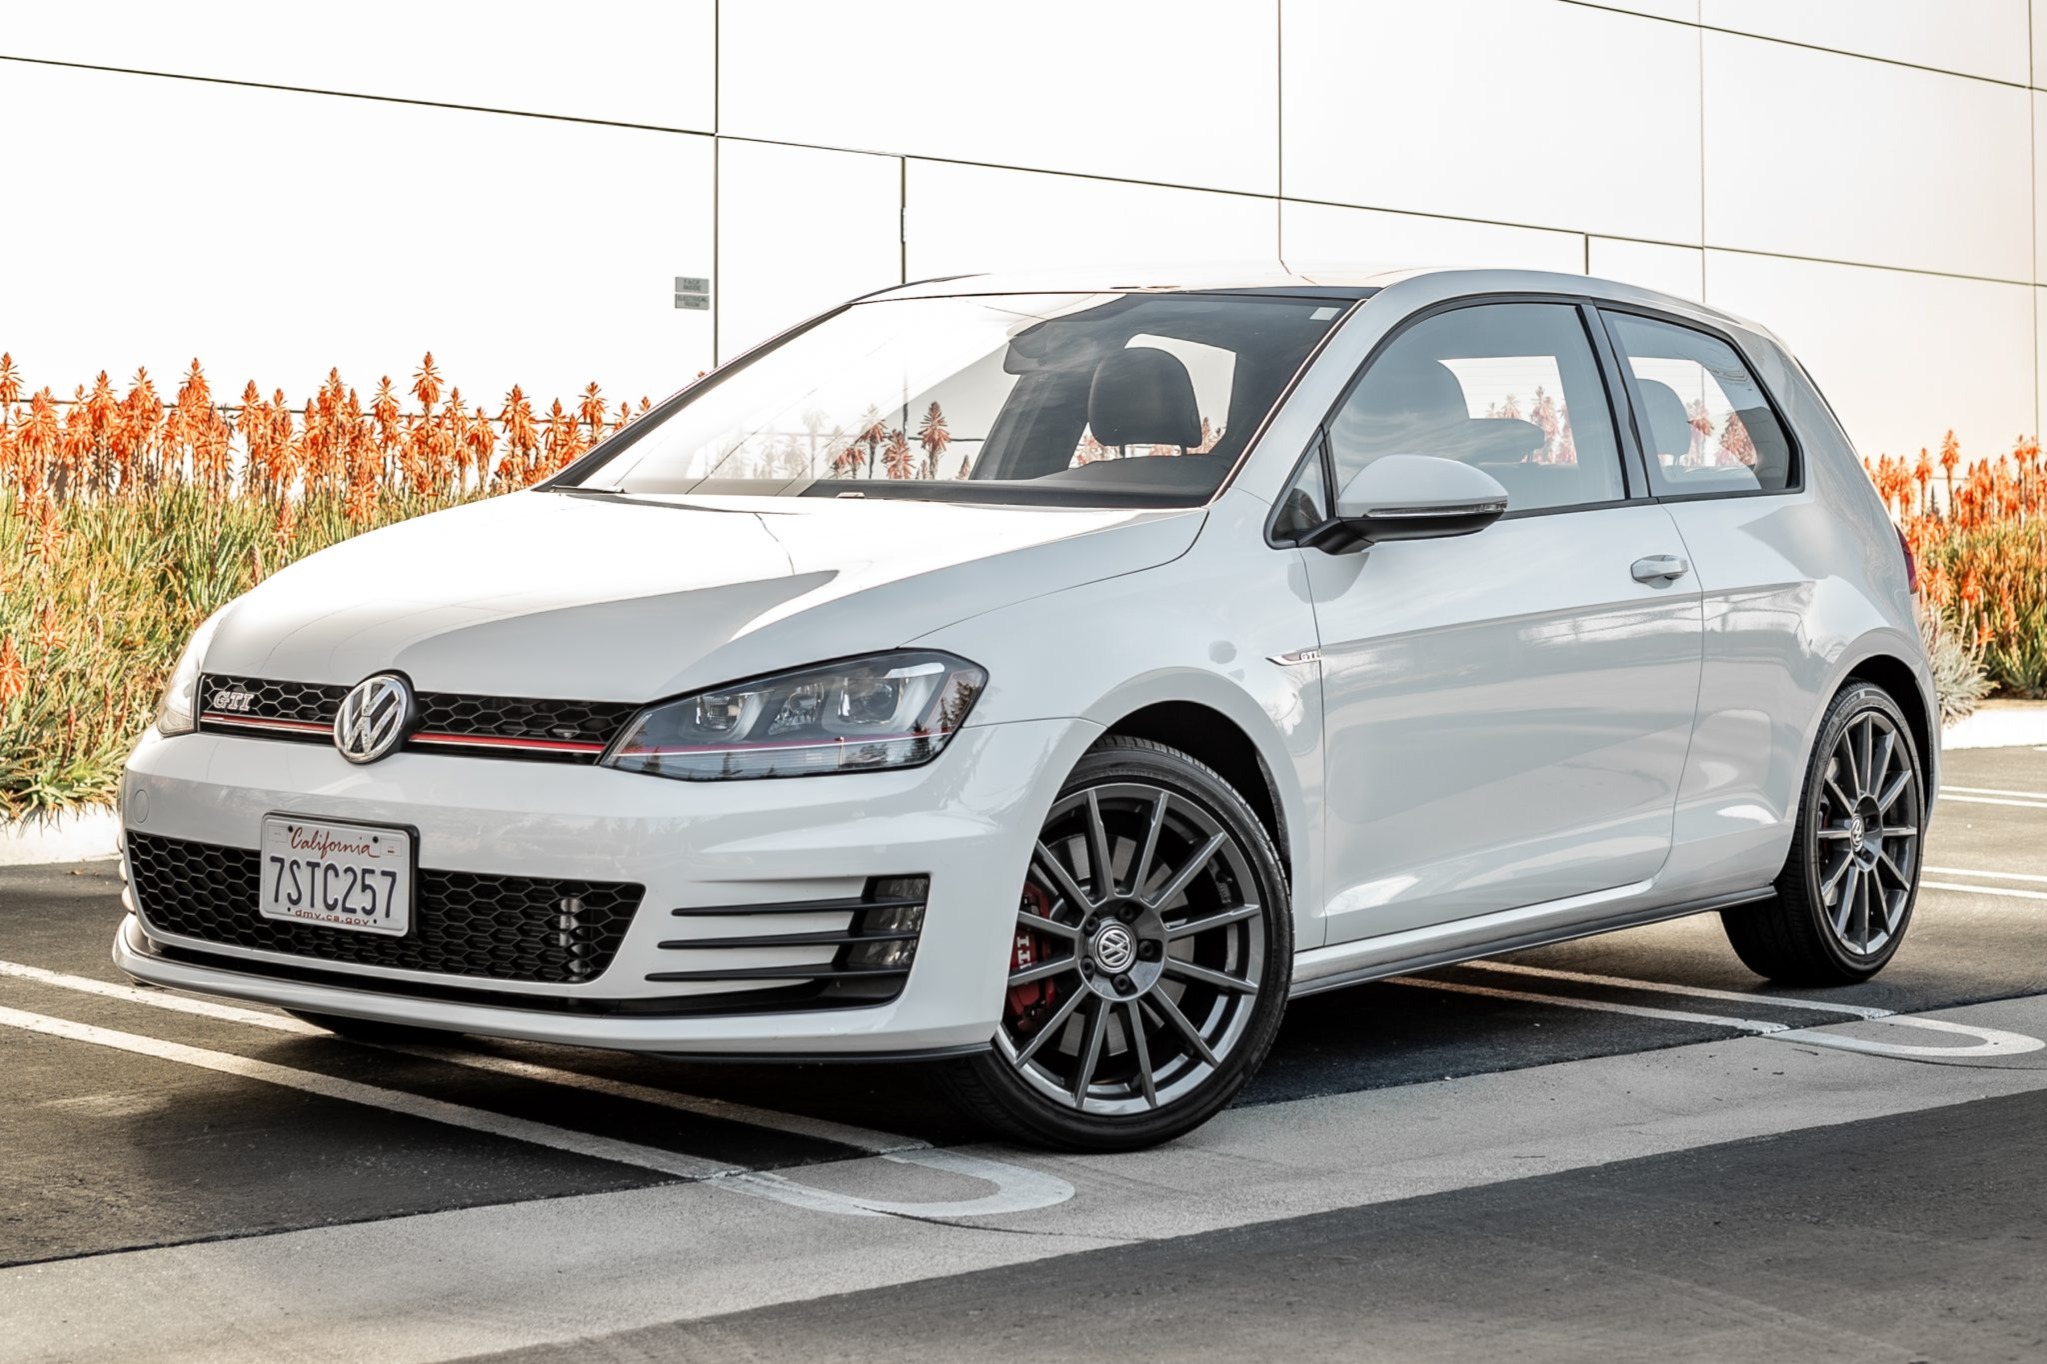 8k-Mile 2016 Volkswagen Golf GTI SE for sale on BaT Auctions - sold for  $28,101 on February 5, 2022 (Lot #65,099) | Bring a Trailer